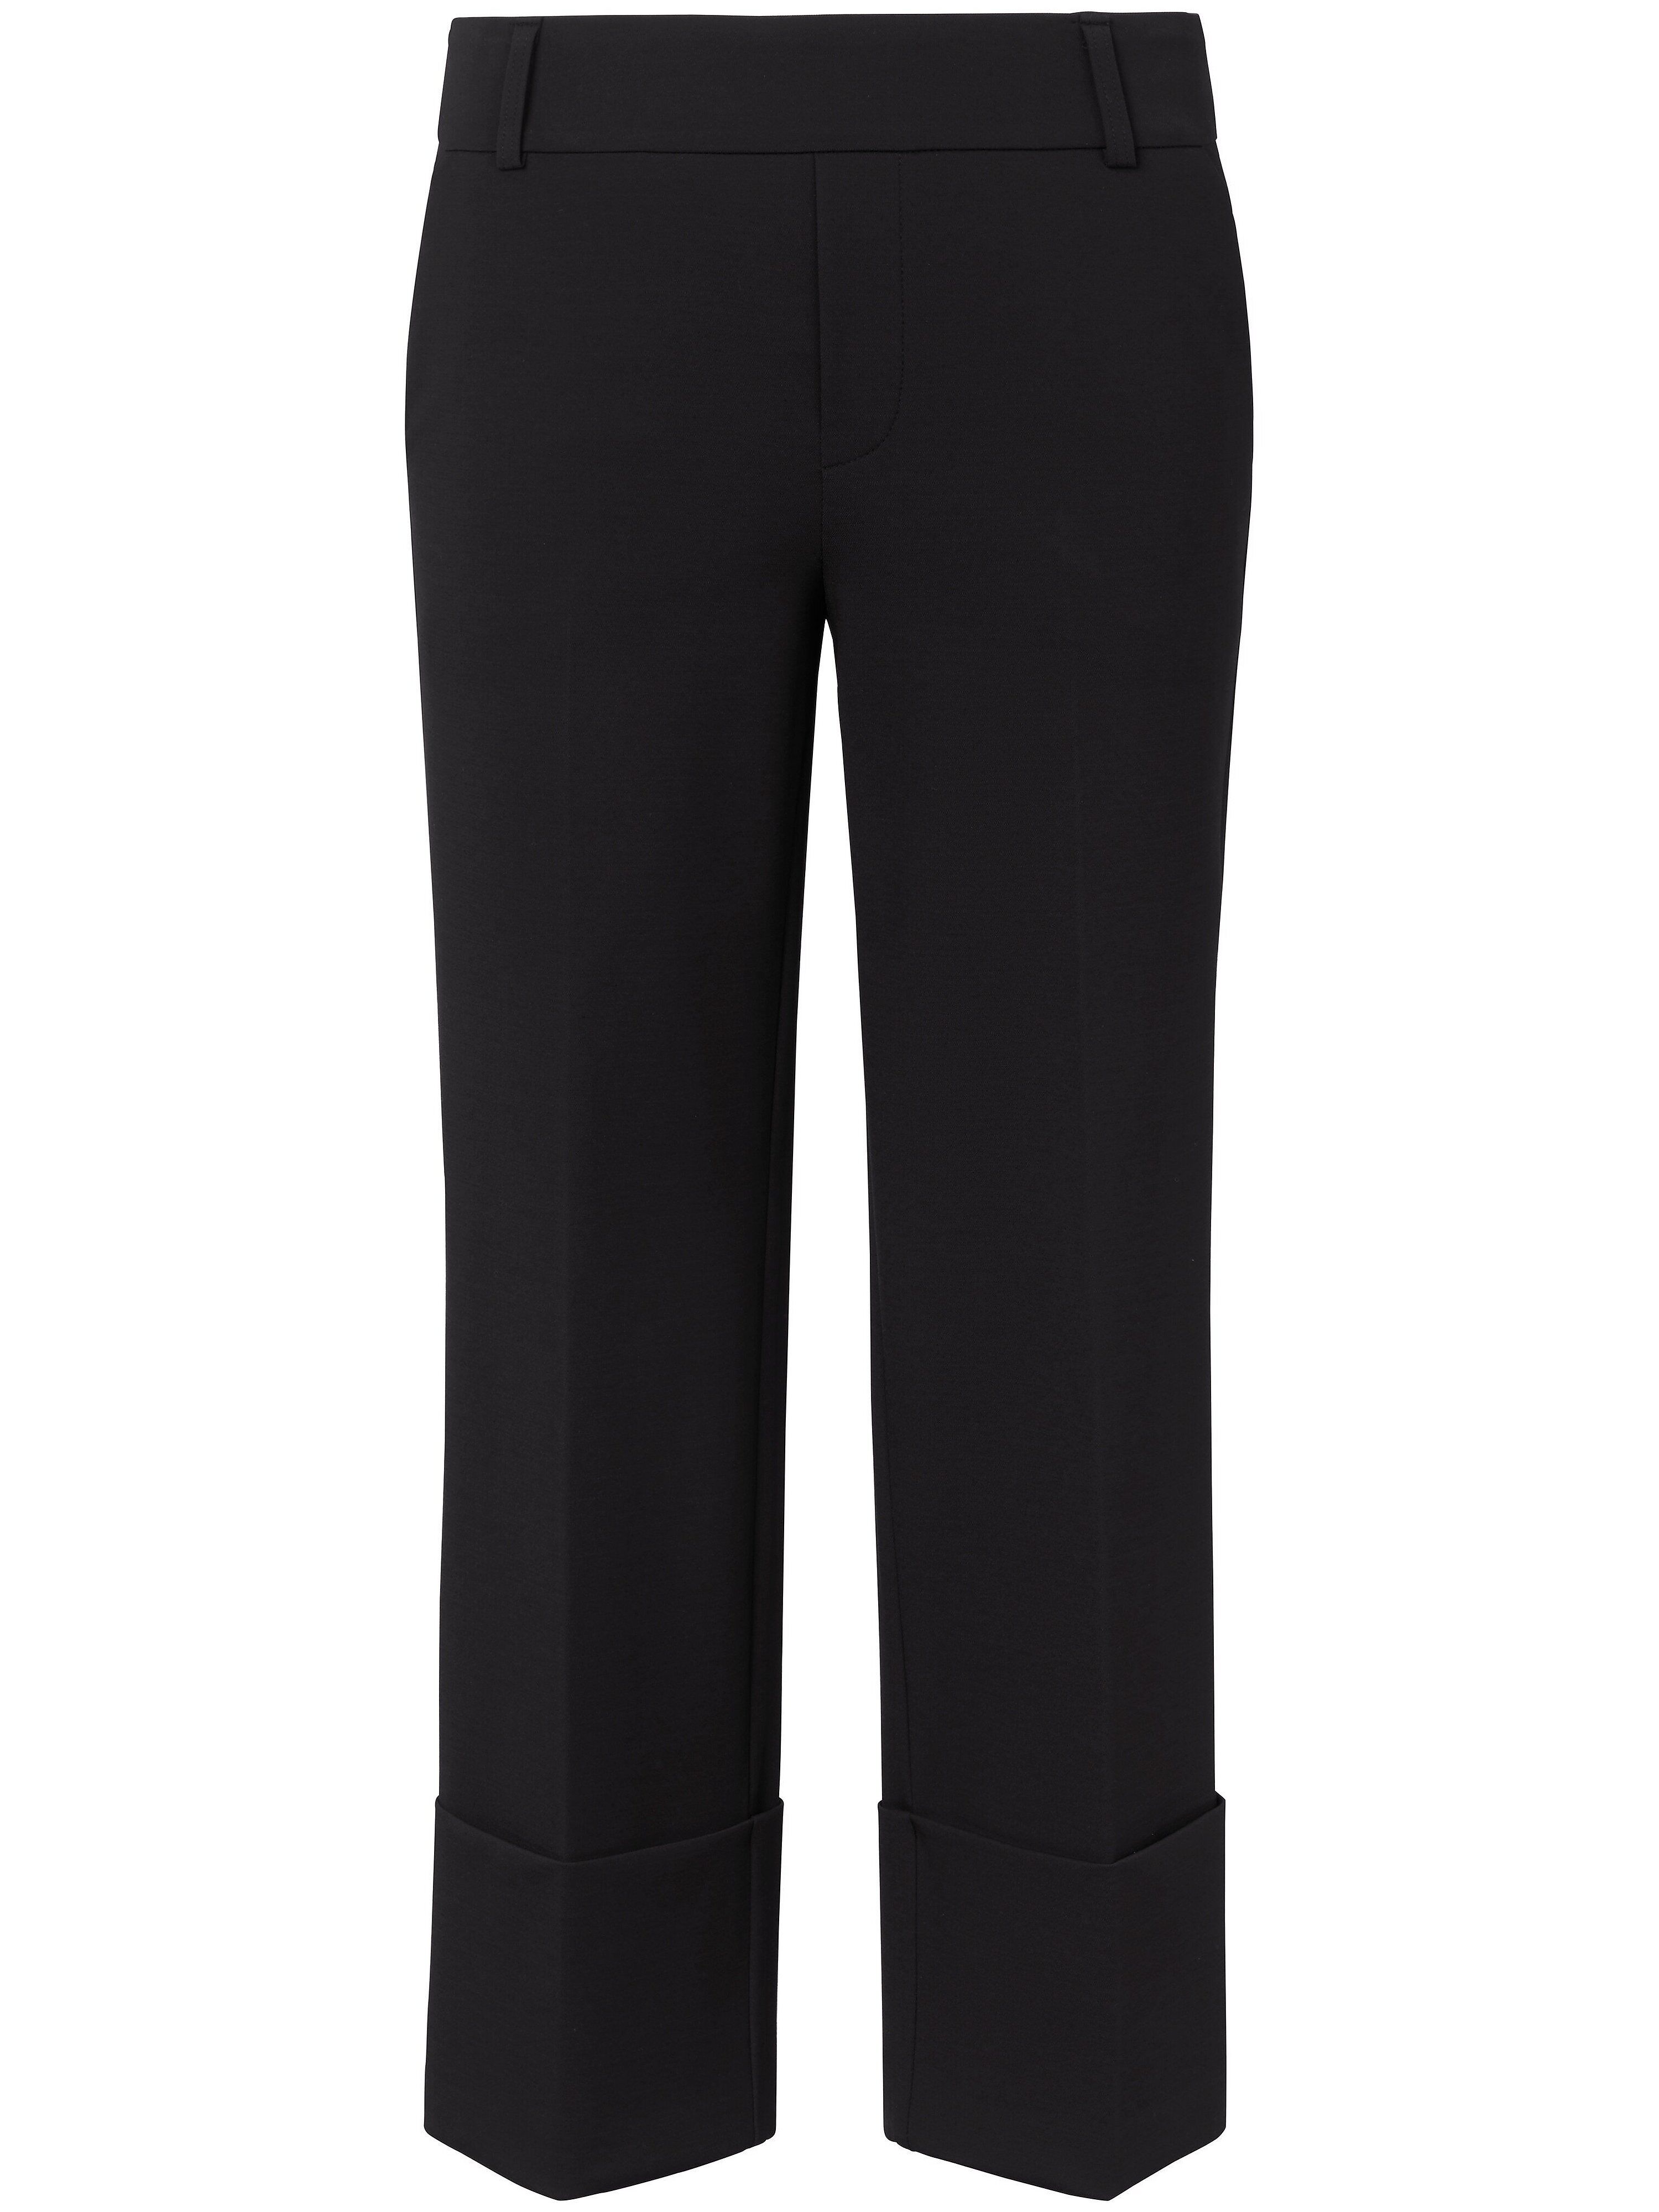 UP! the pant with THINCREDIBLE! Fit ™ Bukser i 7/8-længde Fra UP! the pant with THINCREDIBLE! Fit ™ sort